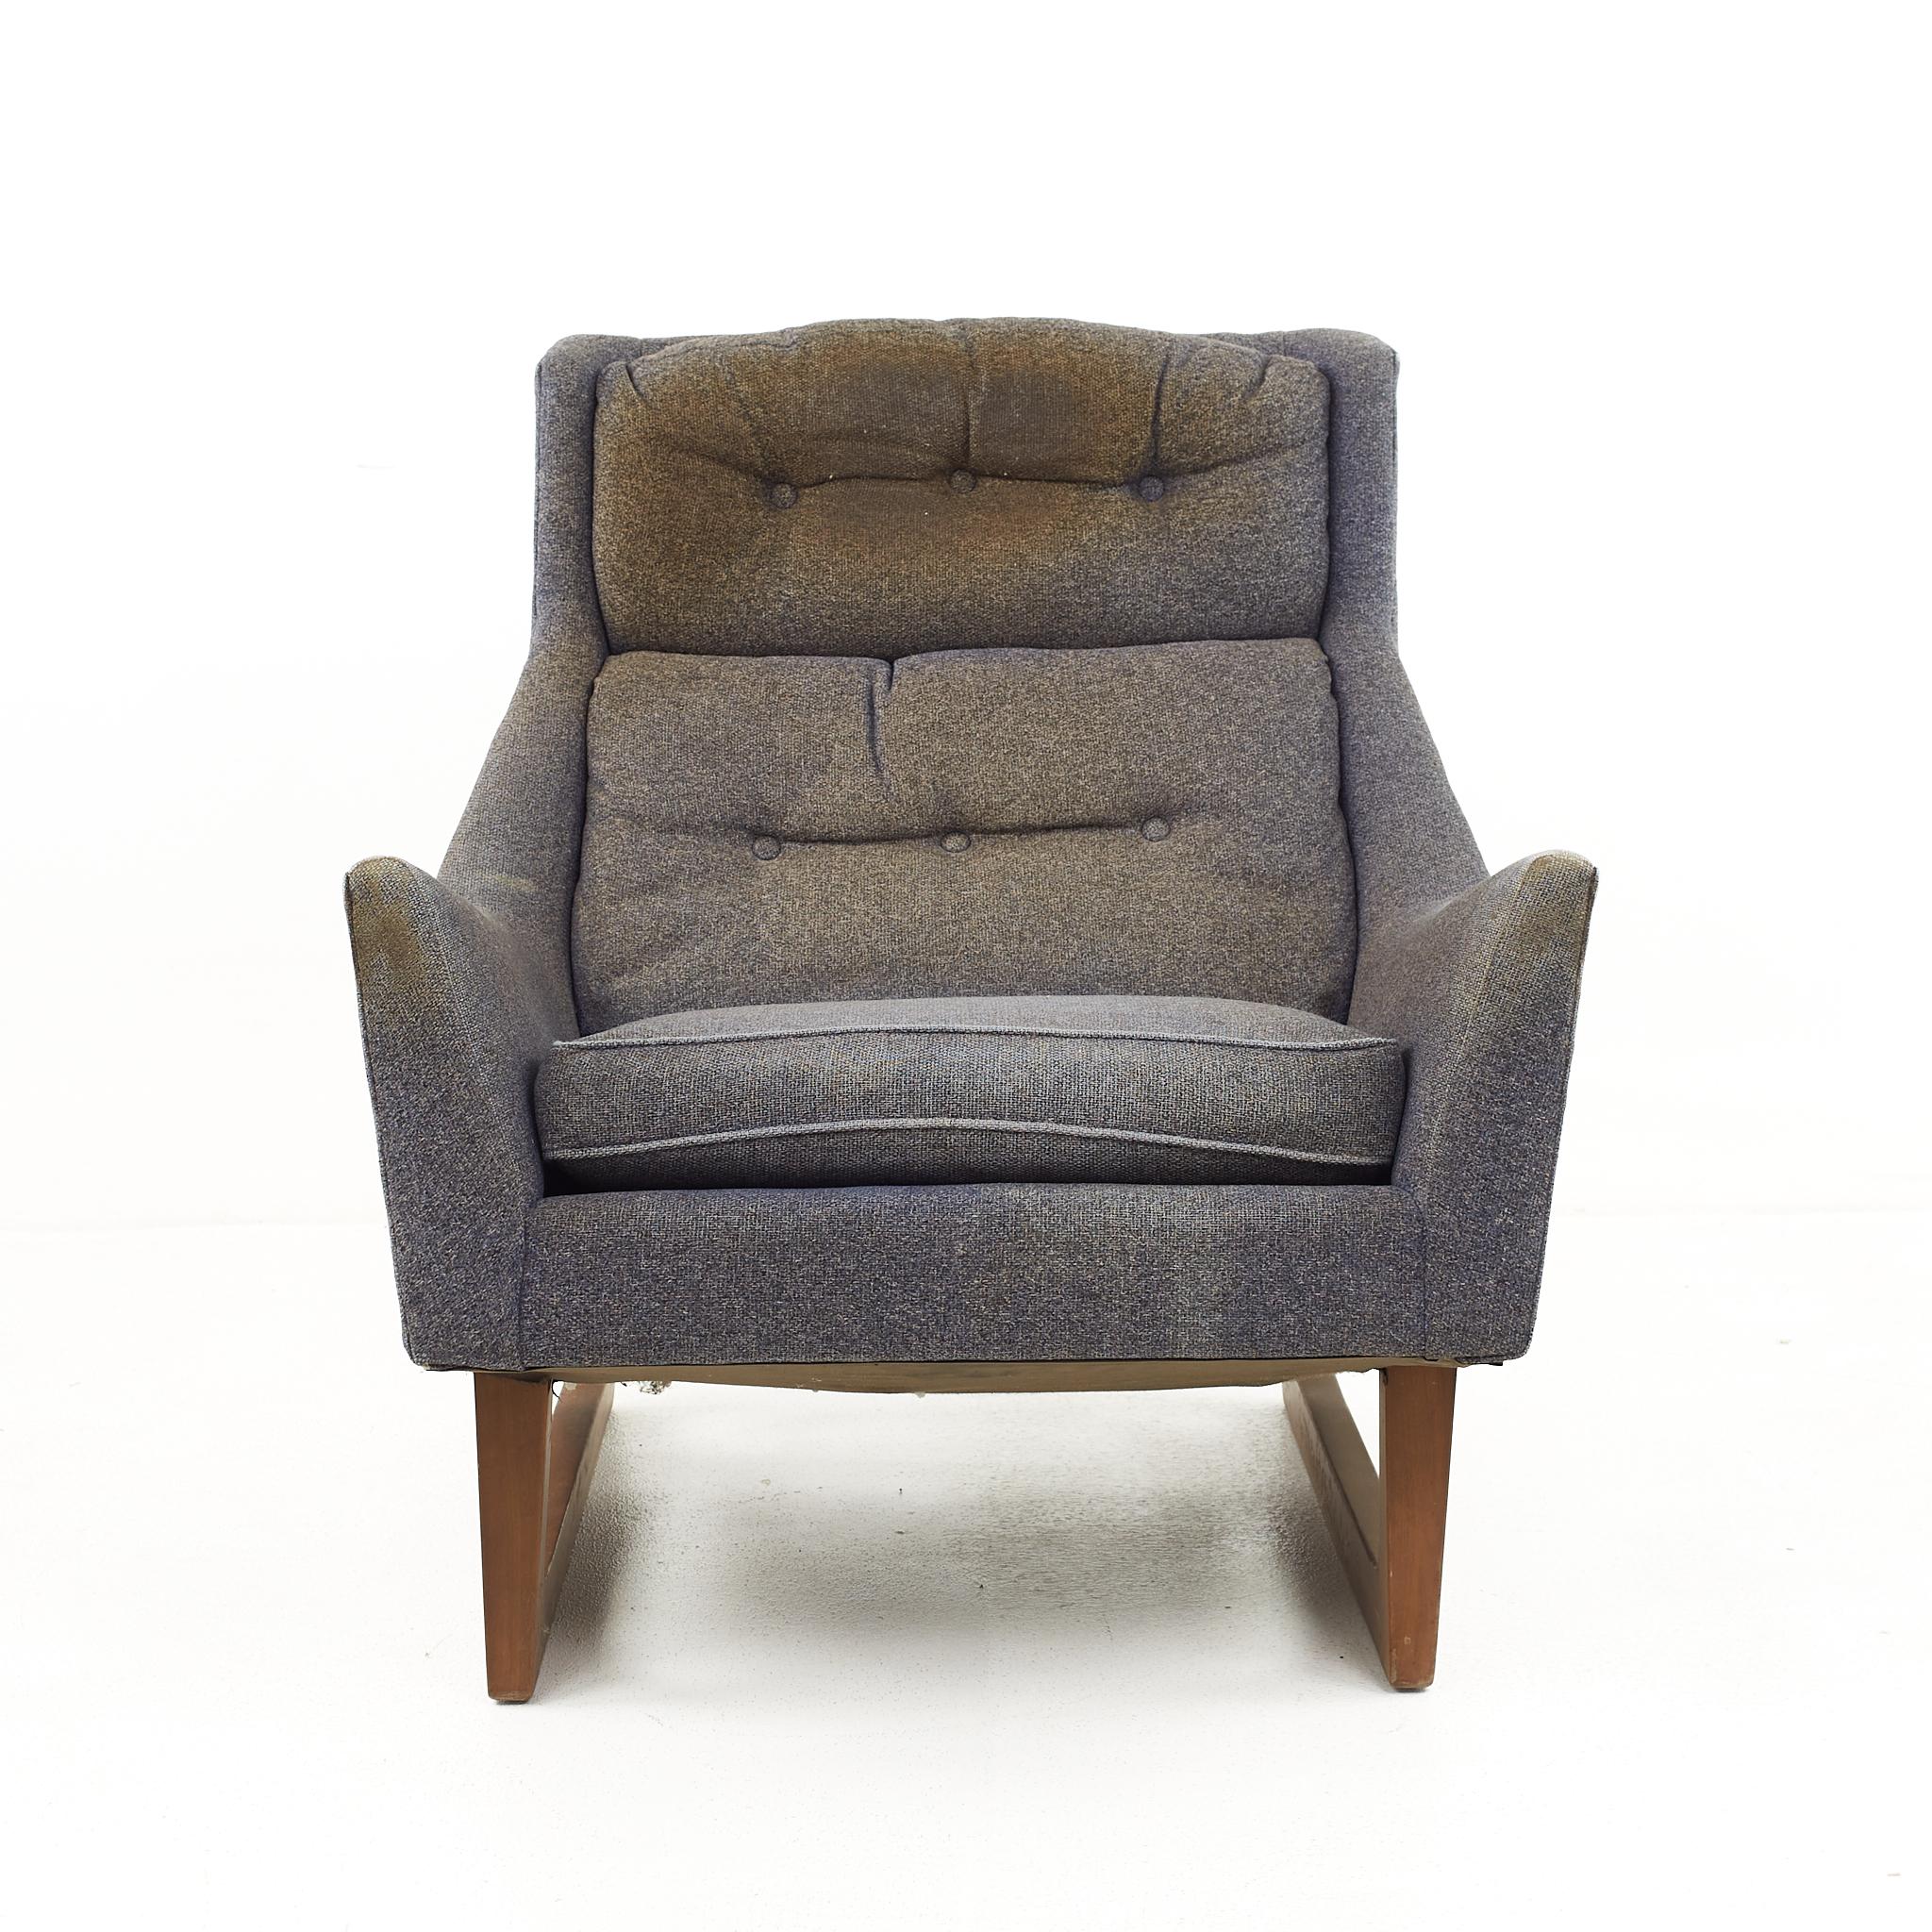 Adrian Pearsall for craft associates style mid century walnut lounge chair

The chair measures: 30 wide x 33 deep x 34 high, with a seat height of 18 inches and arm height of 21 inches

Ready for new upholstery. This service is available for an